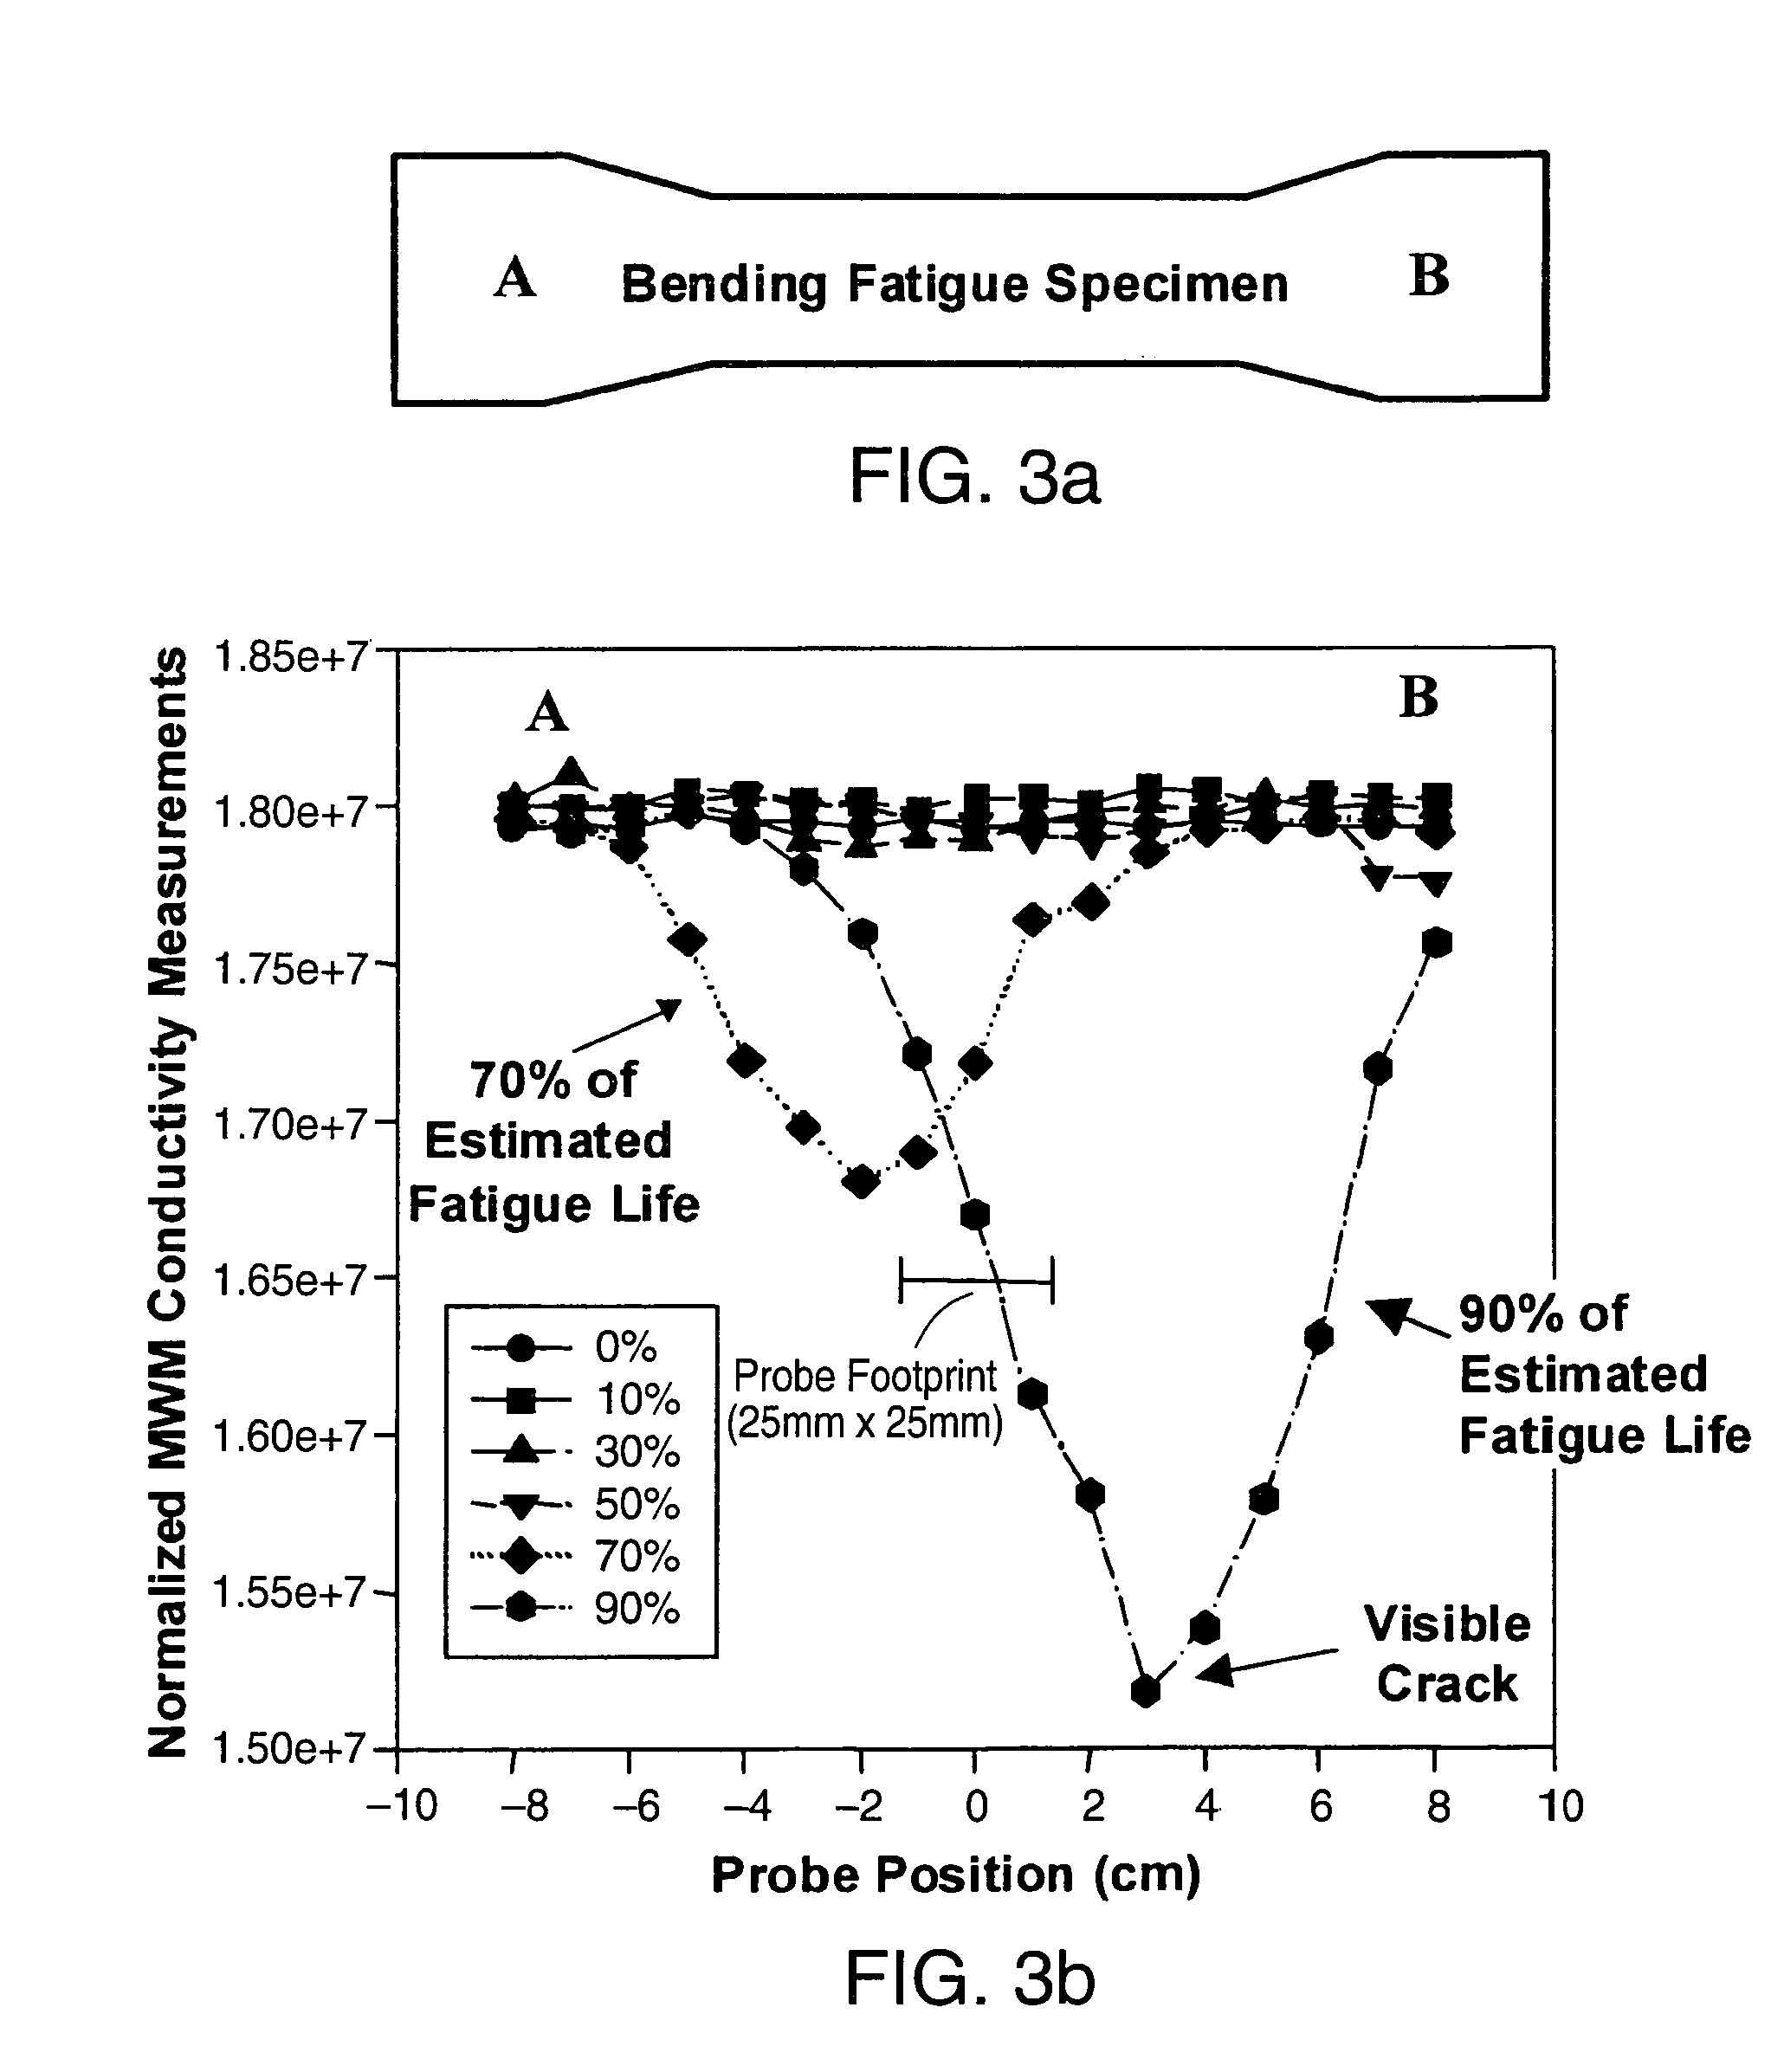 Method for material property monitoring with perforated, surface mounted sensors